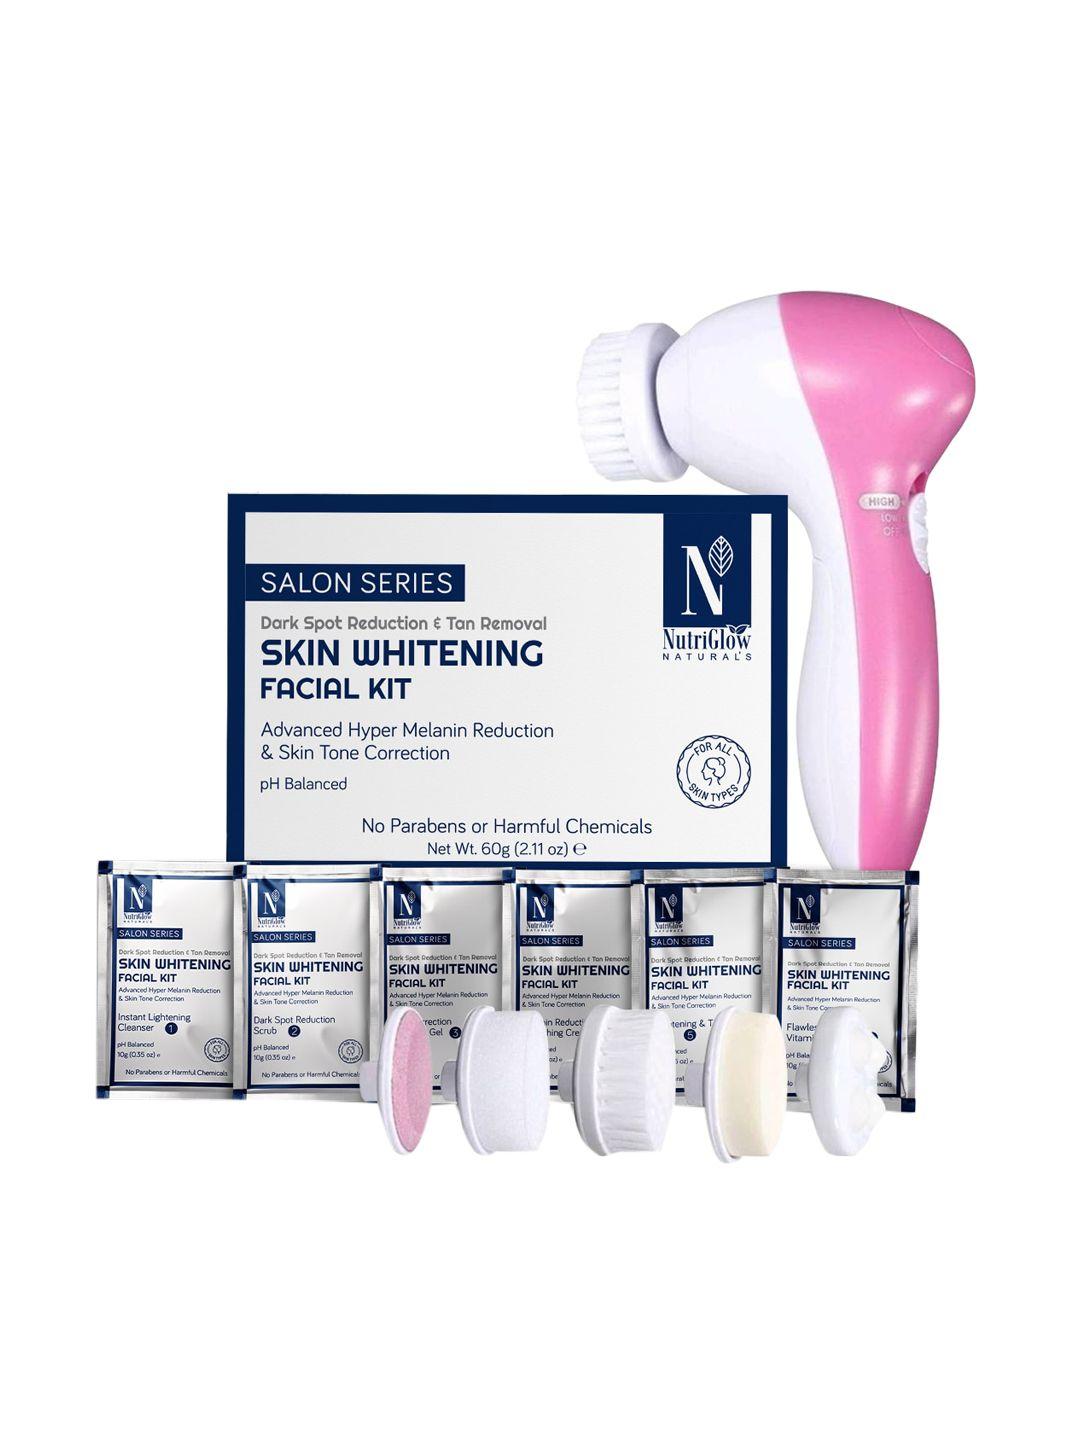 nutriglow-naturals-skin-whitening-facial-kit-60gm-with-5-in-1-rotating-face-massager